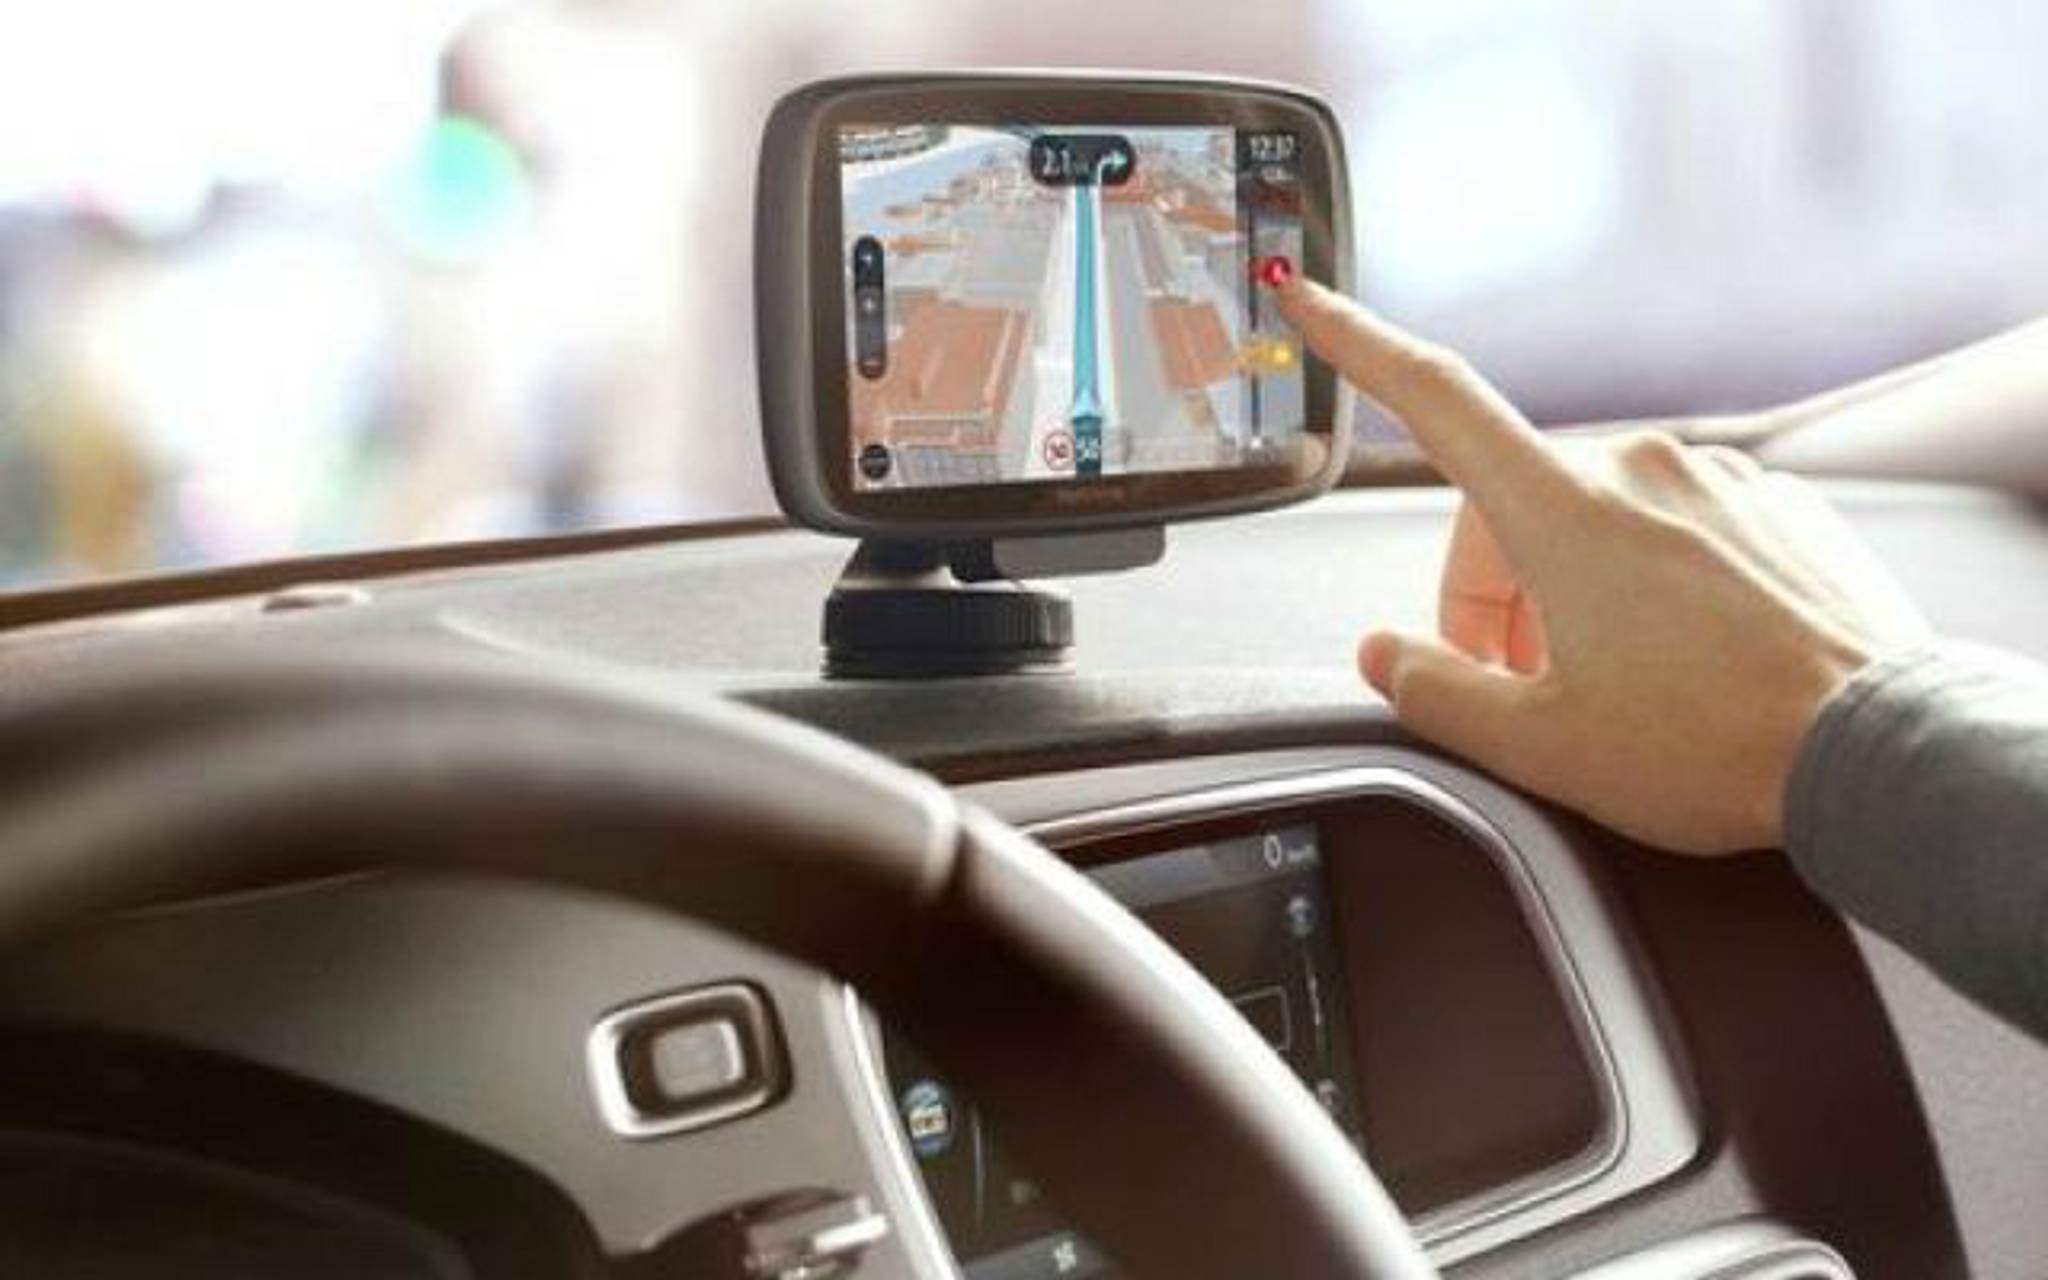 UK learners must be able to use a sat nav